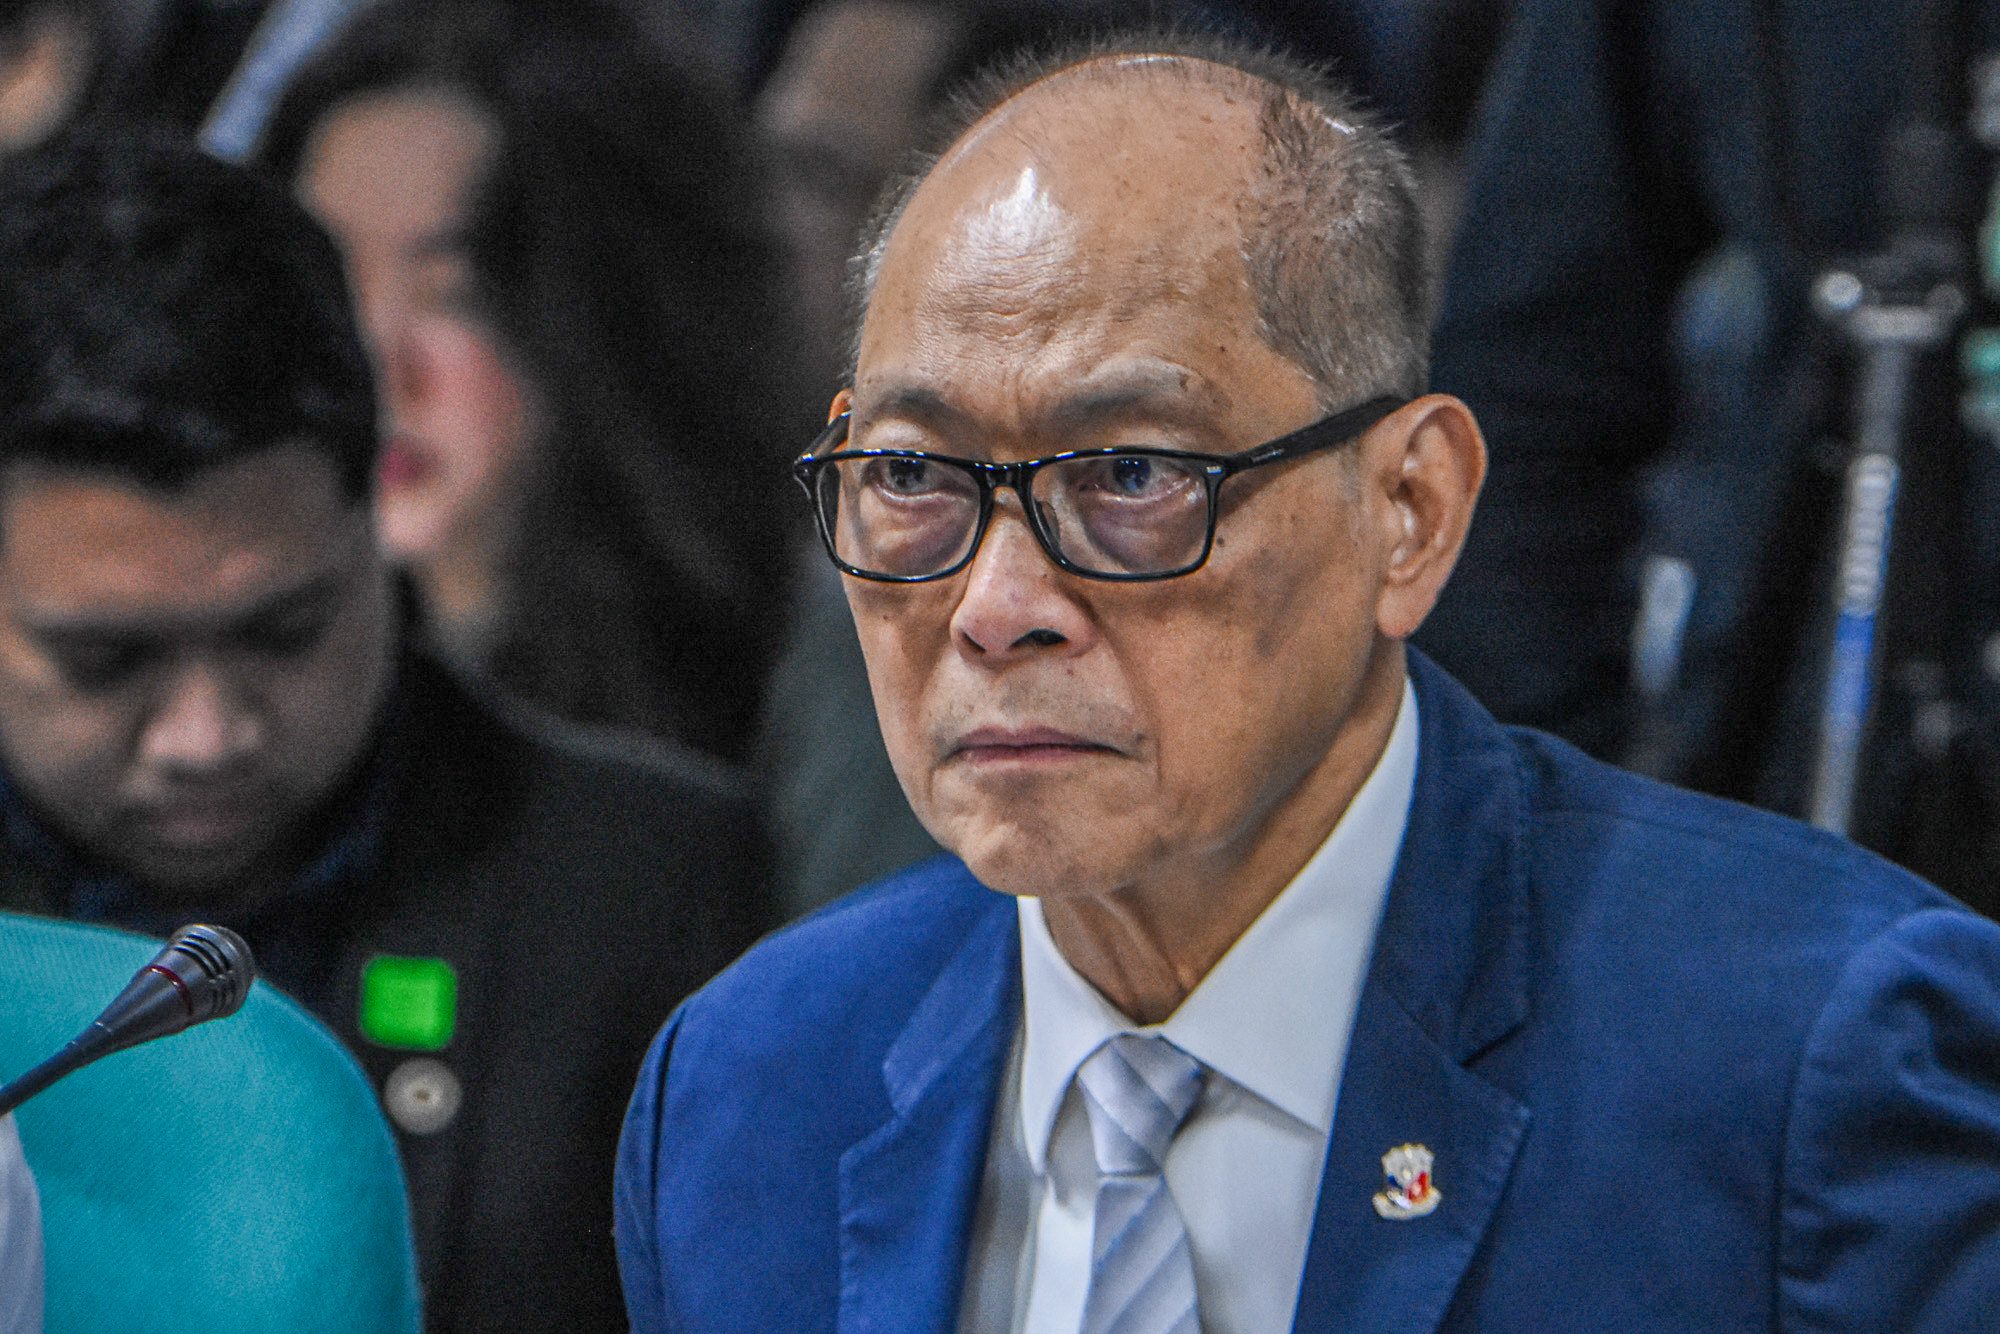 Diokno on talks of being replaced: ‘I don’t comment on rumors’